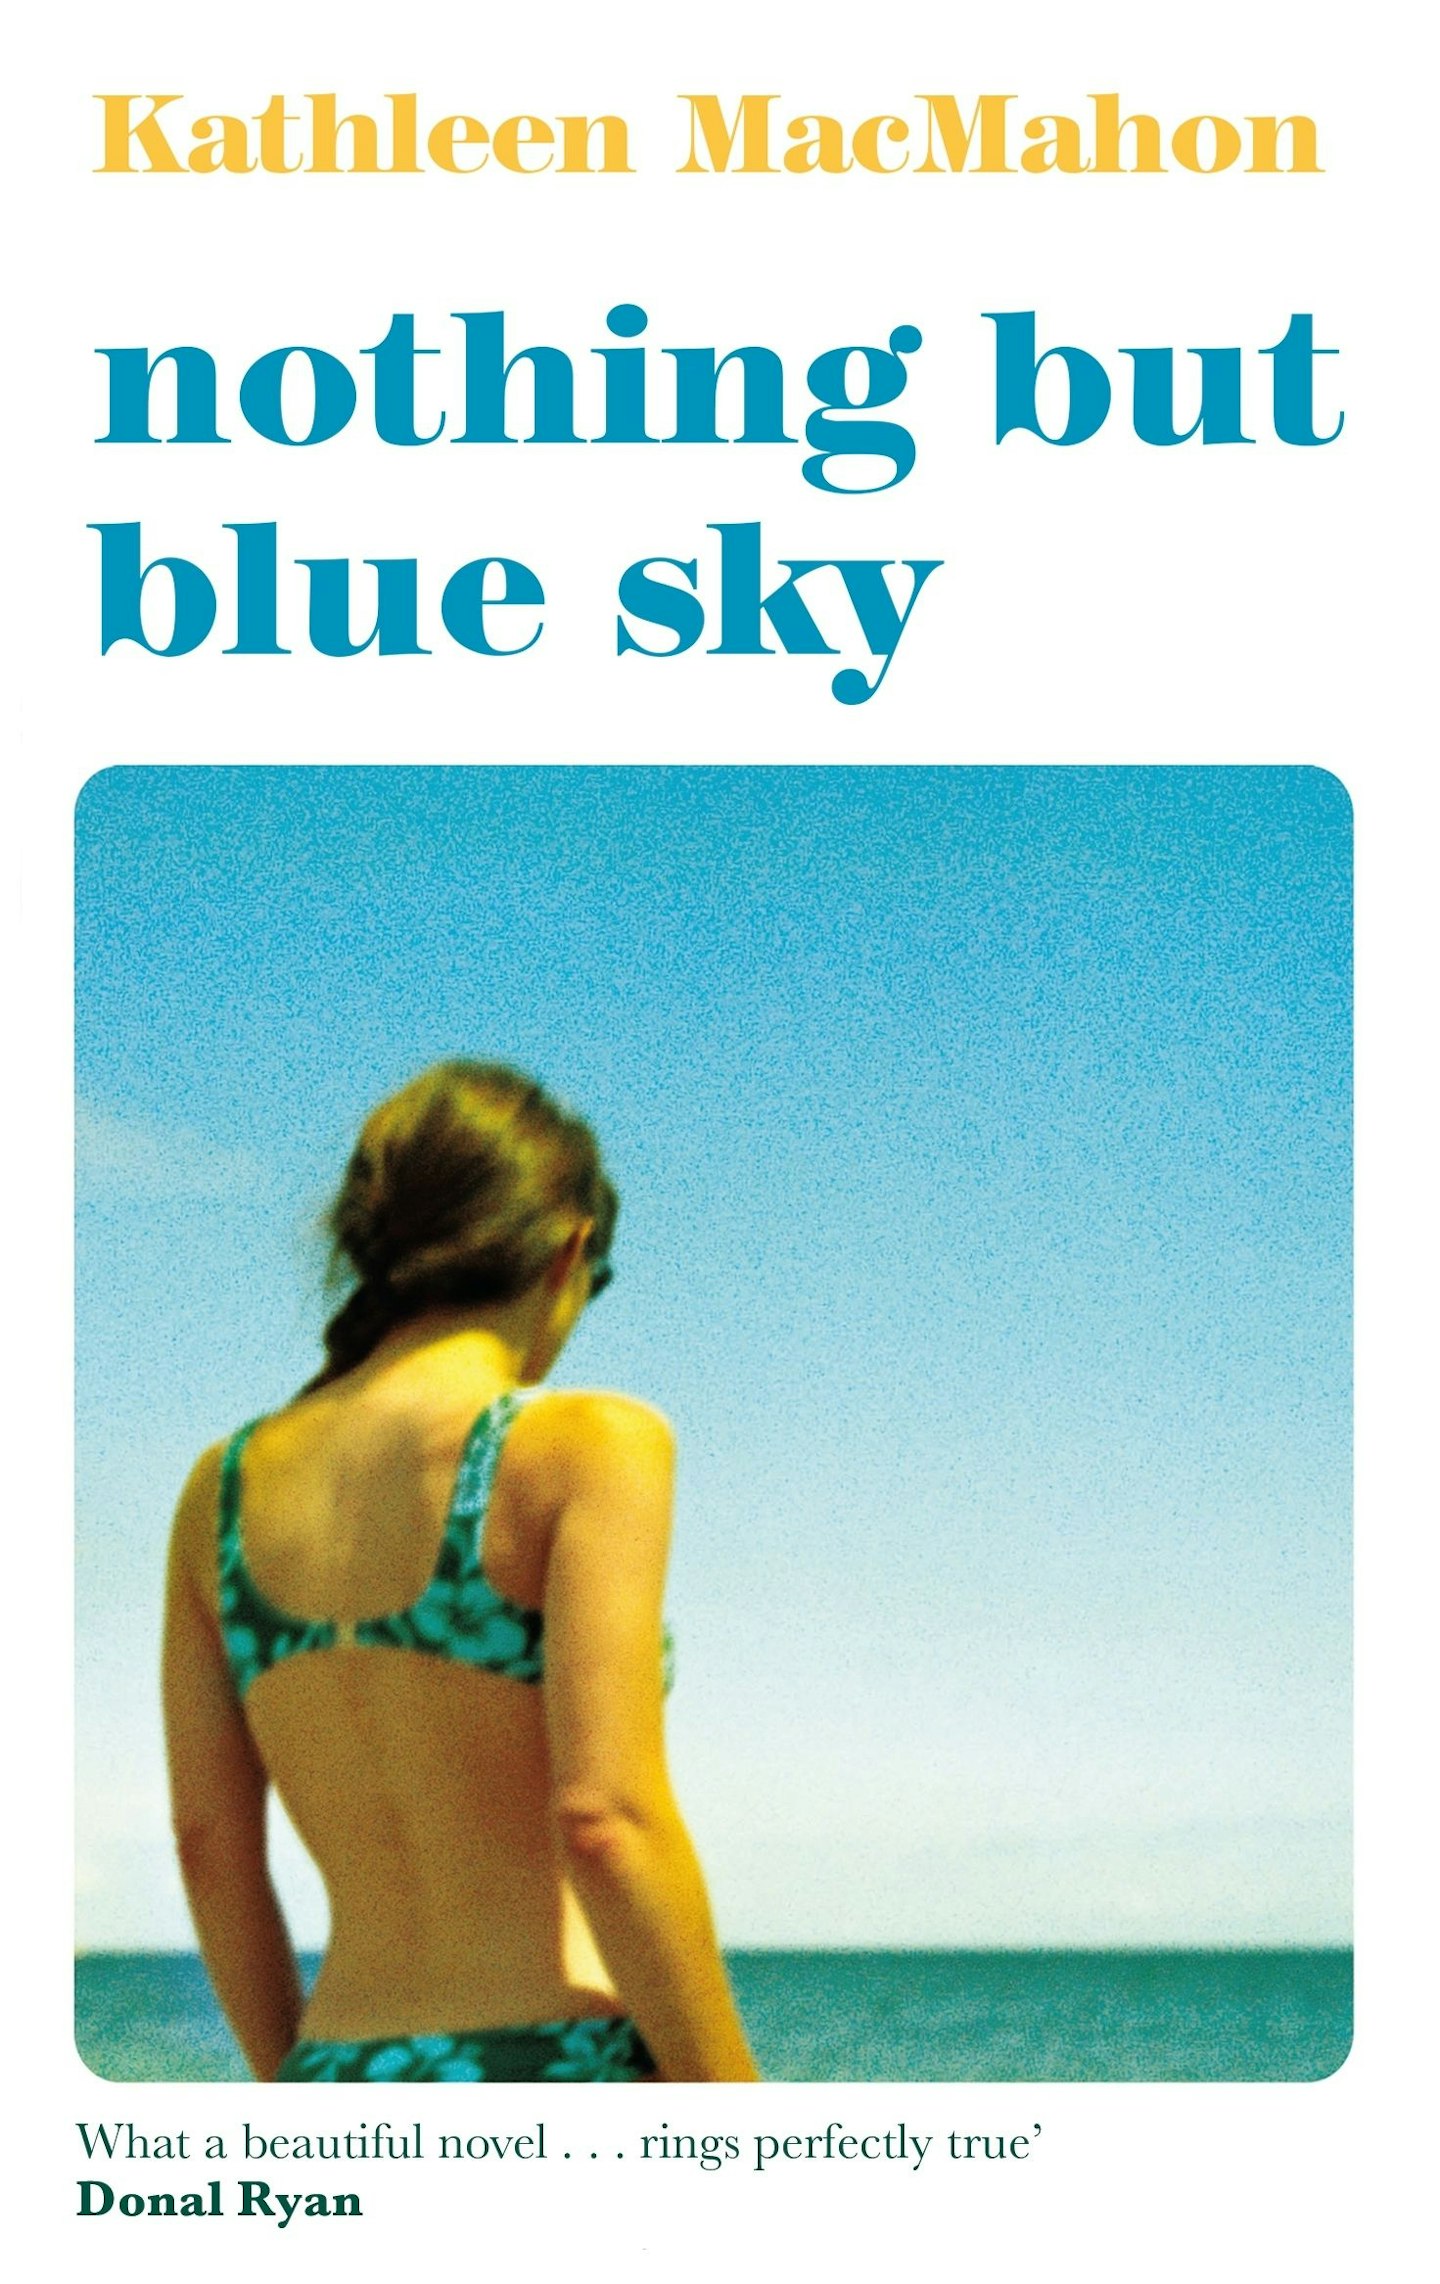 NOTHING BUT BLUE SKY by Kathleen McMahon